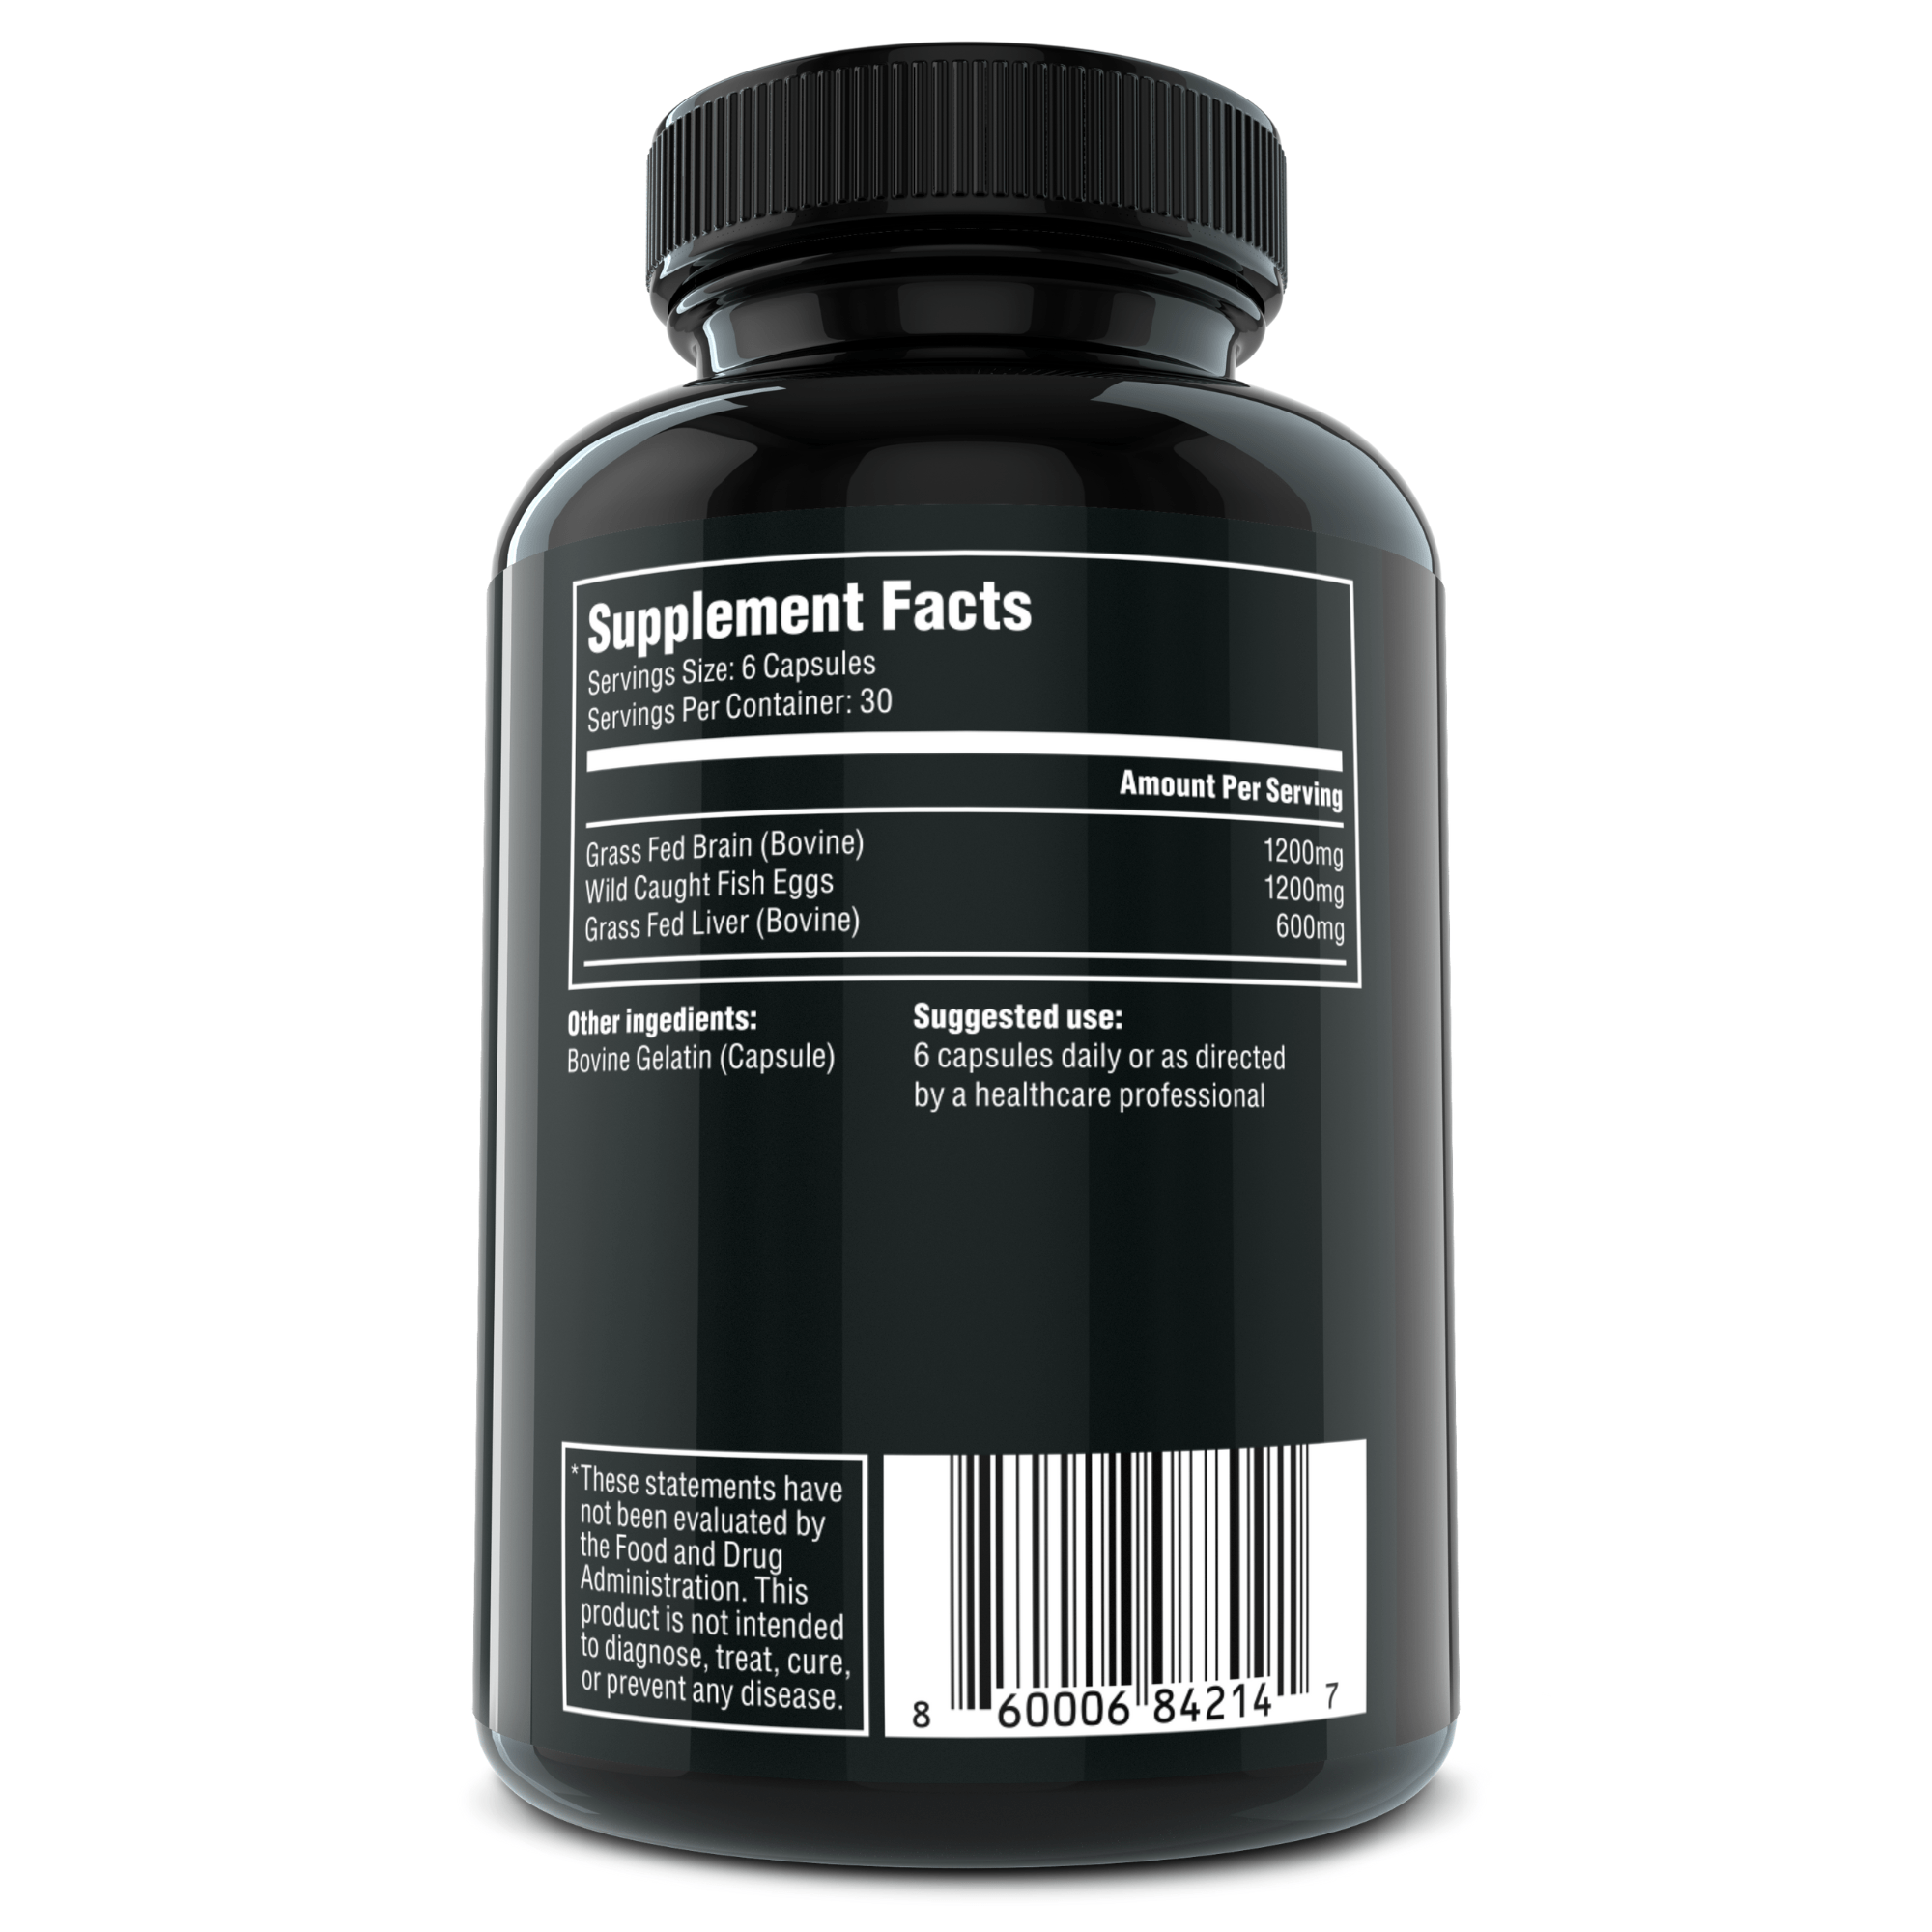 Rear of the Charge bottle with supplements facts panel completely visible